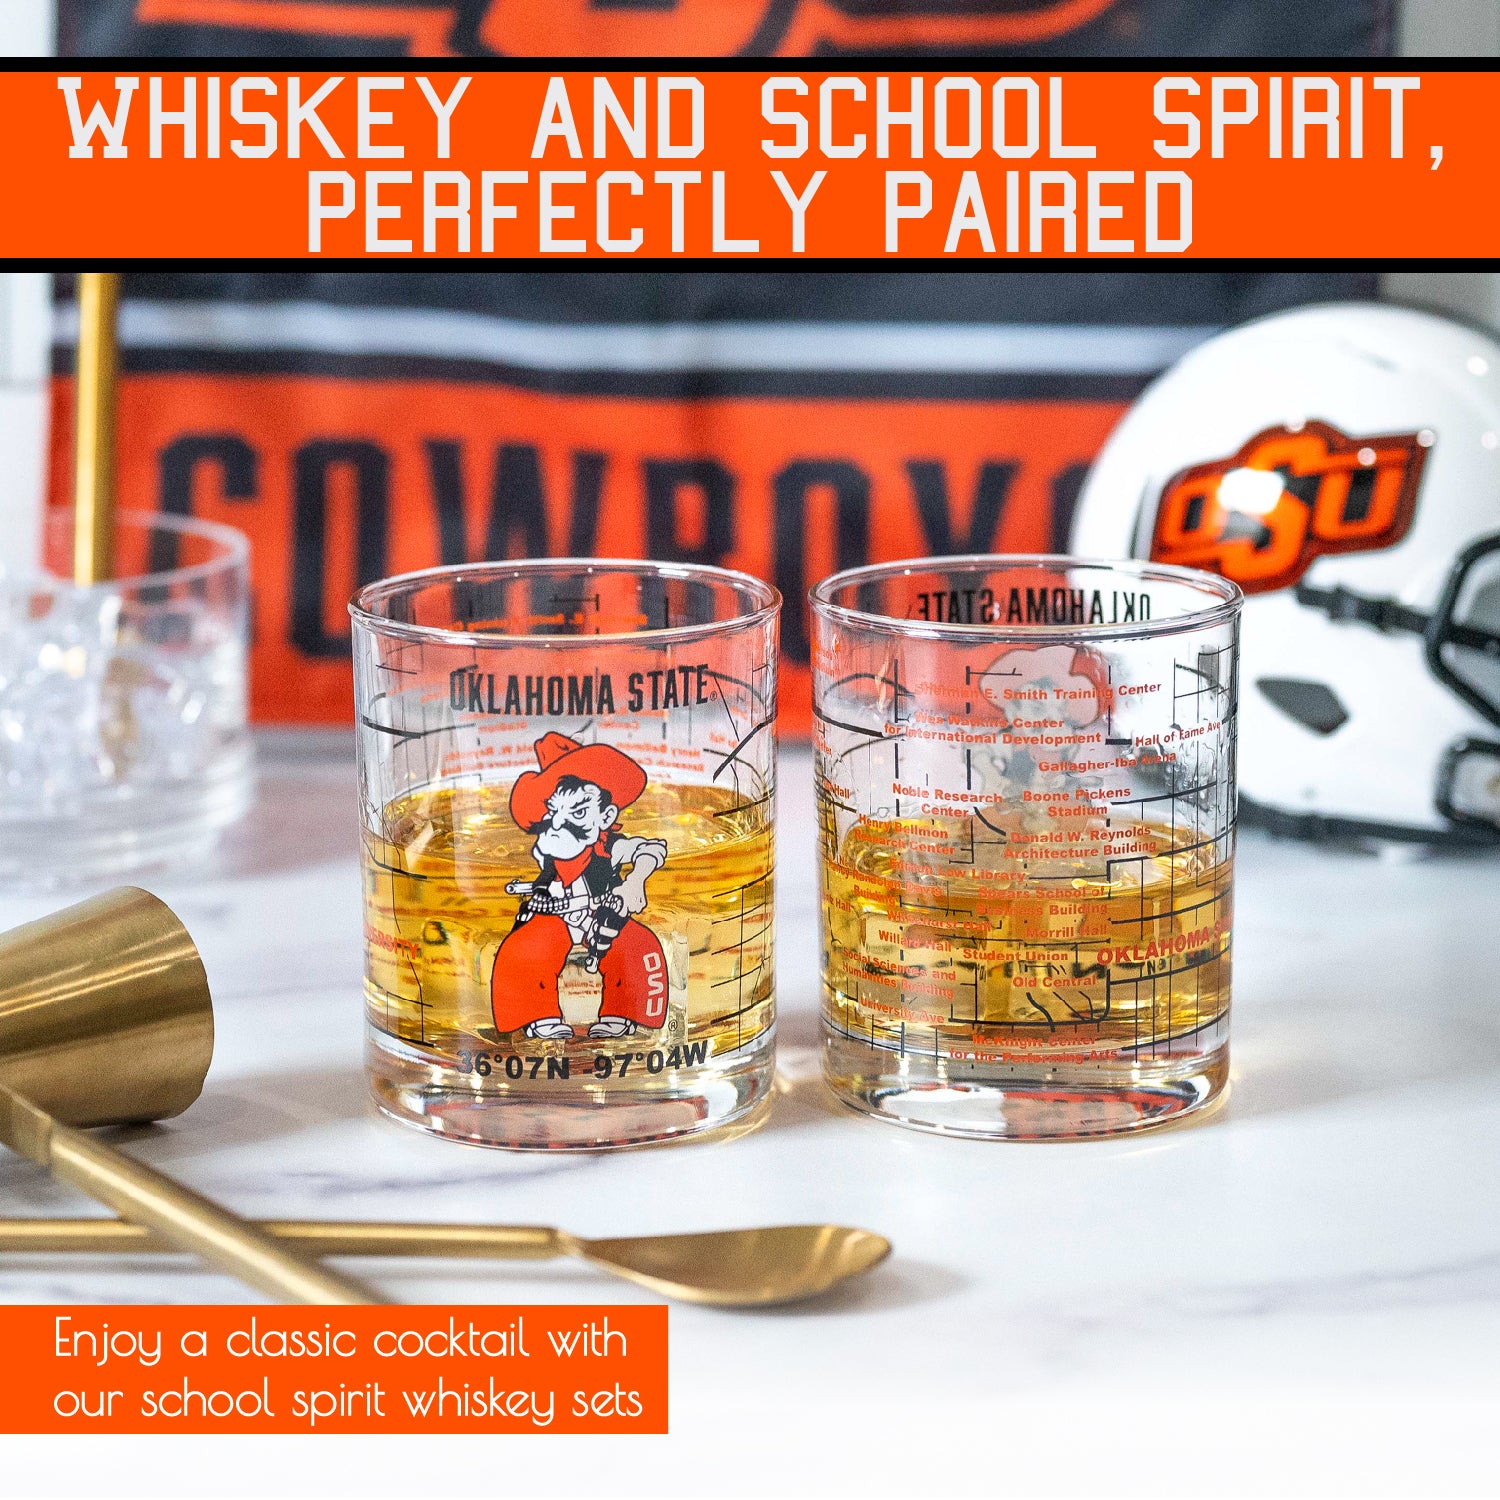 University Of Louisville Whiskey Glass Set (2 Low Ball Glasses)  - Contains Full Color Louisville Cardinals Logo & Campus Map - Cardinals  Gift Idea for College Grads & Alumni 